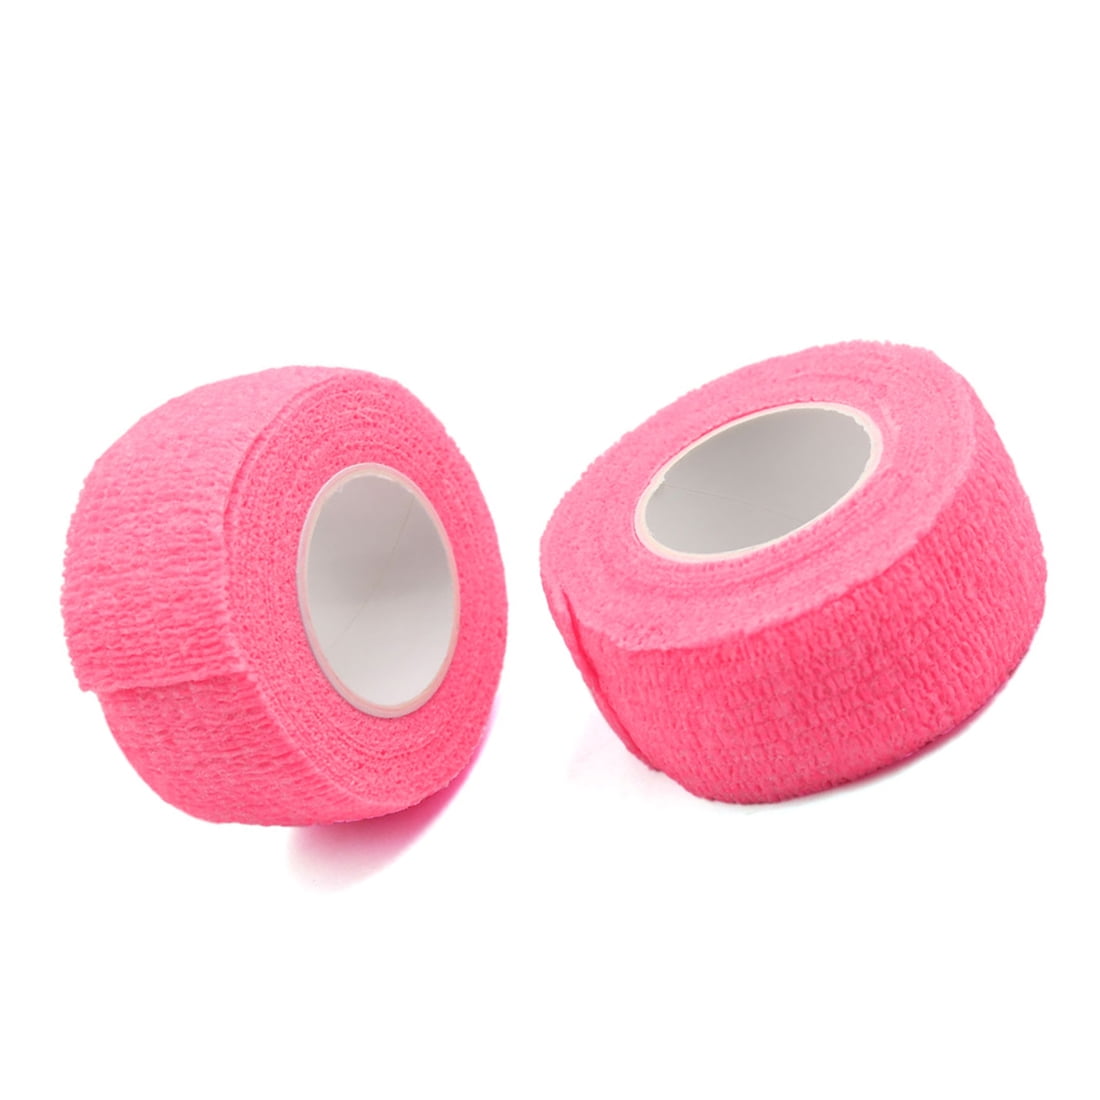 RISEN Cohesive Bandage Cohesive Bandage 2? x 5 Yards, 6 Rolls, Self  Adherent Wrap Medical Tape, Adhesive Flexible Breathable First Aid Gauze  Ideal for Stretch Athletic, Ankle Sprains & 